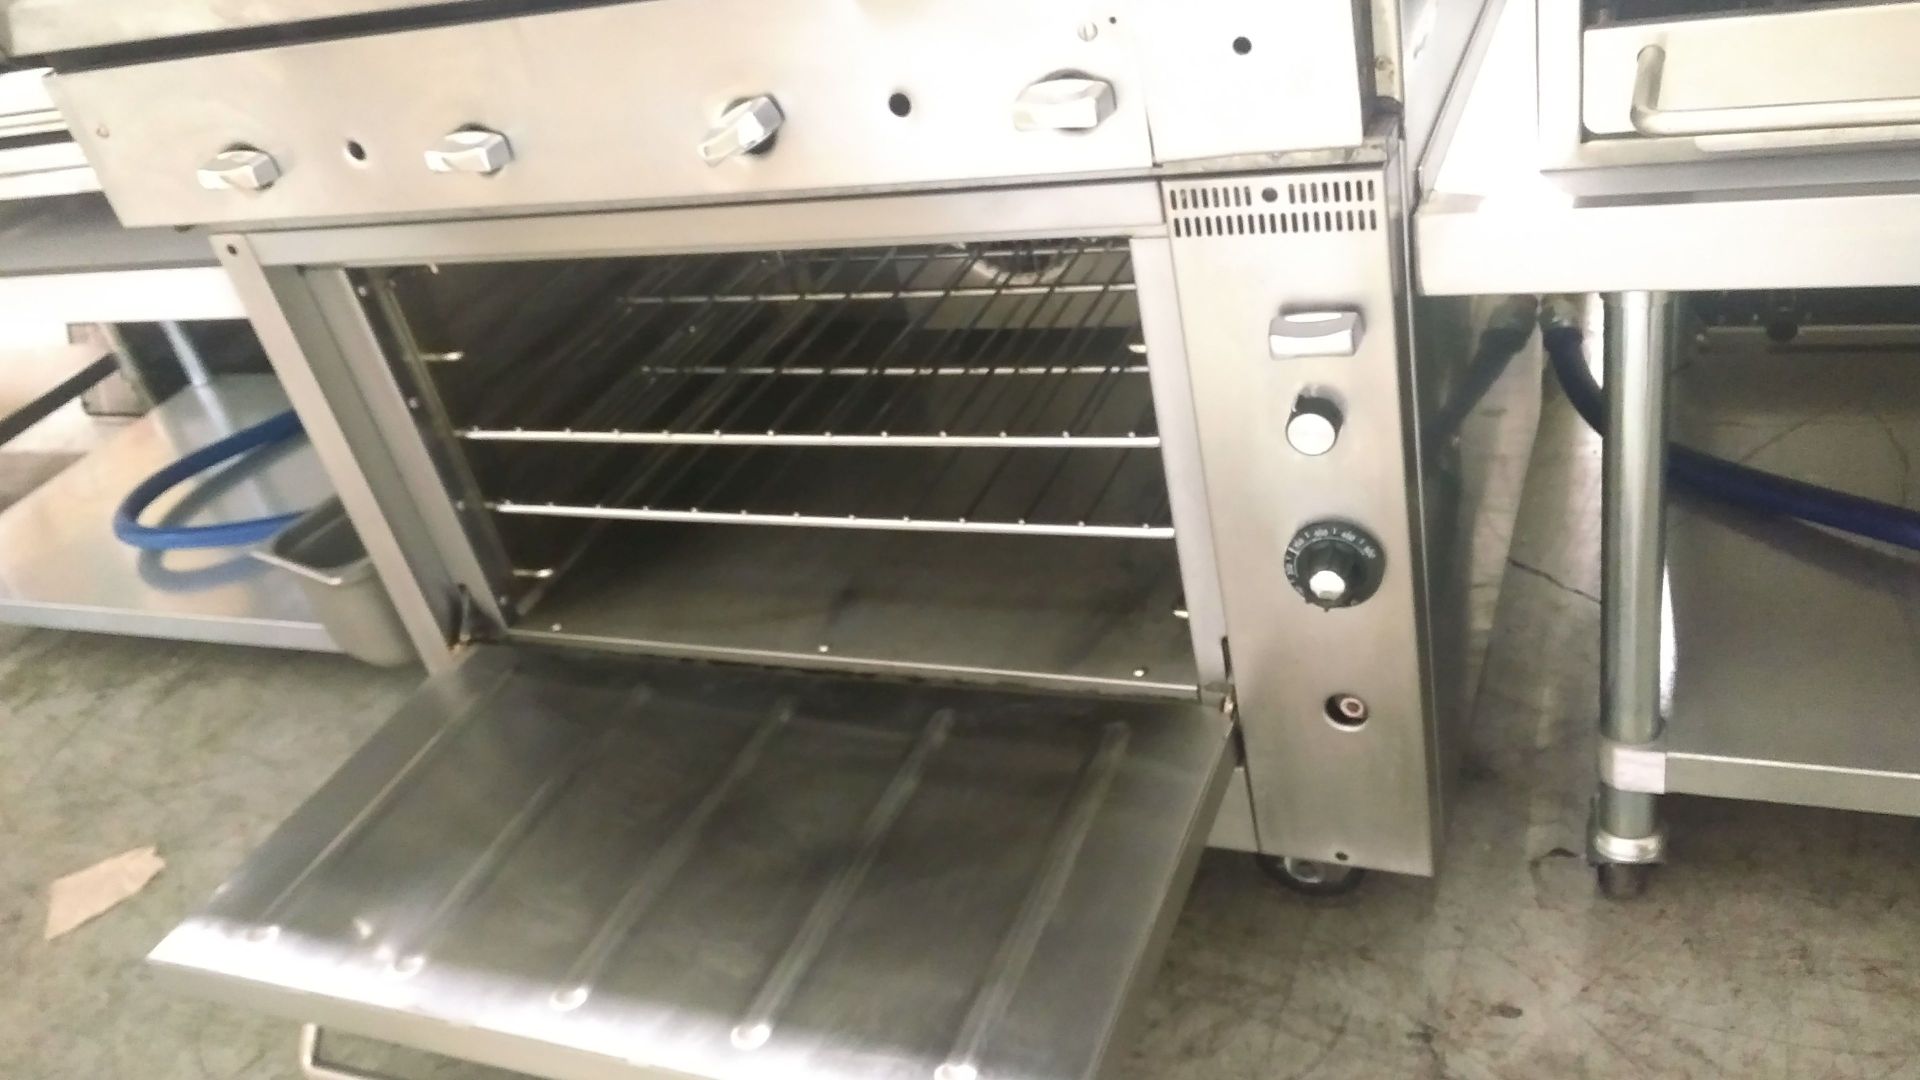 Quest 36" NG Griddle Convection Range - Image 2 of 4